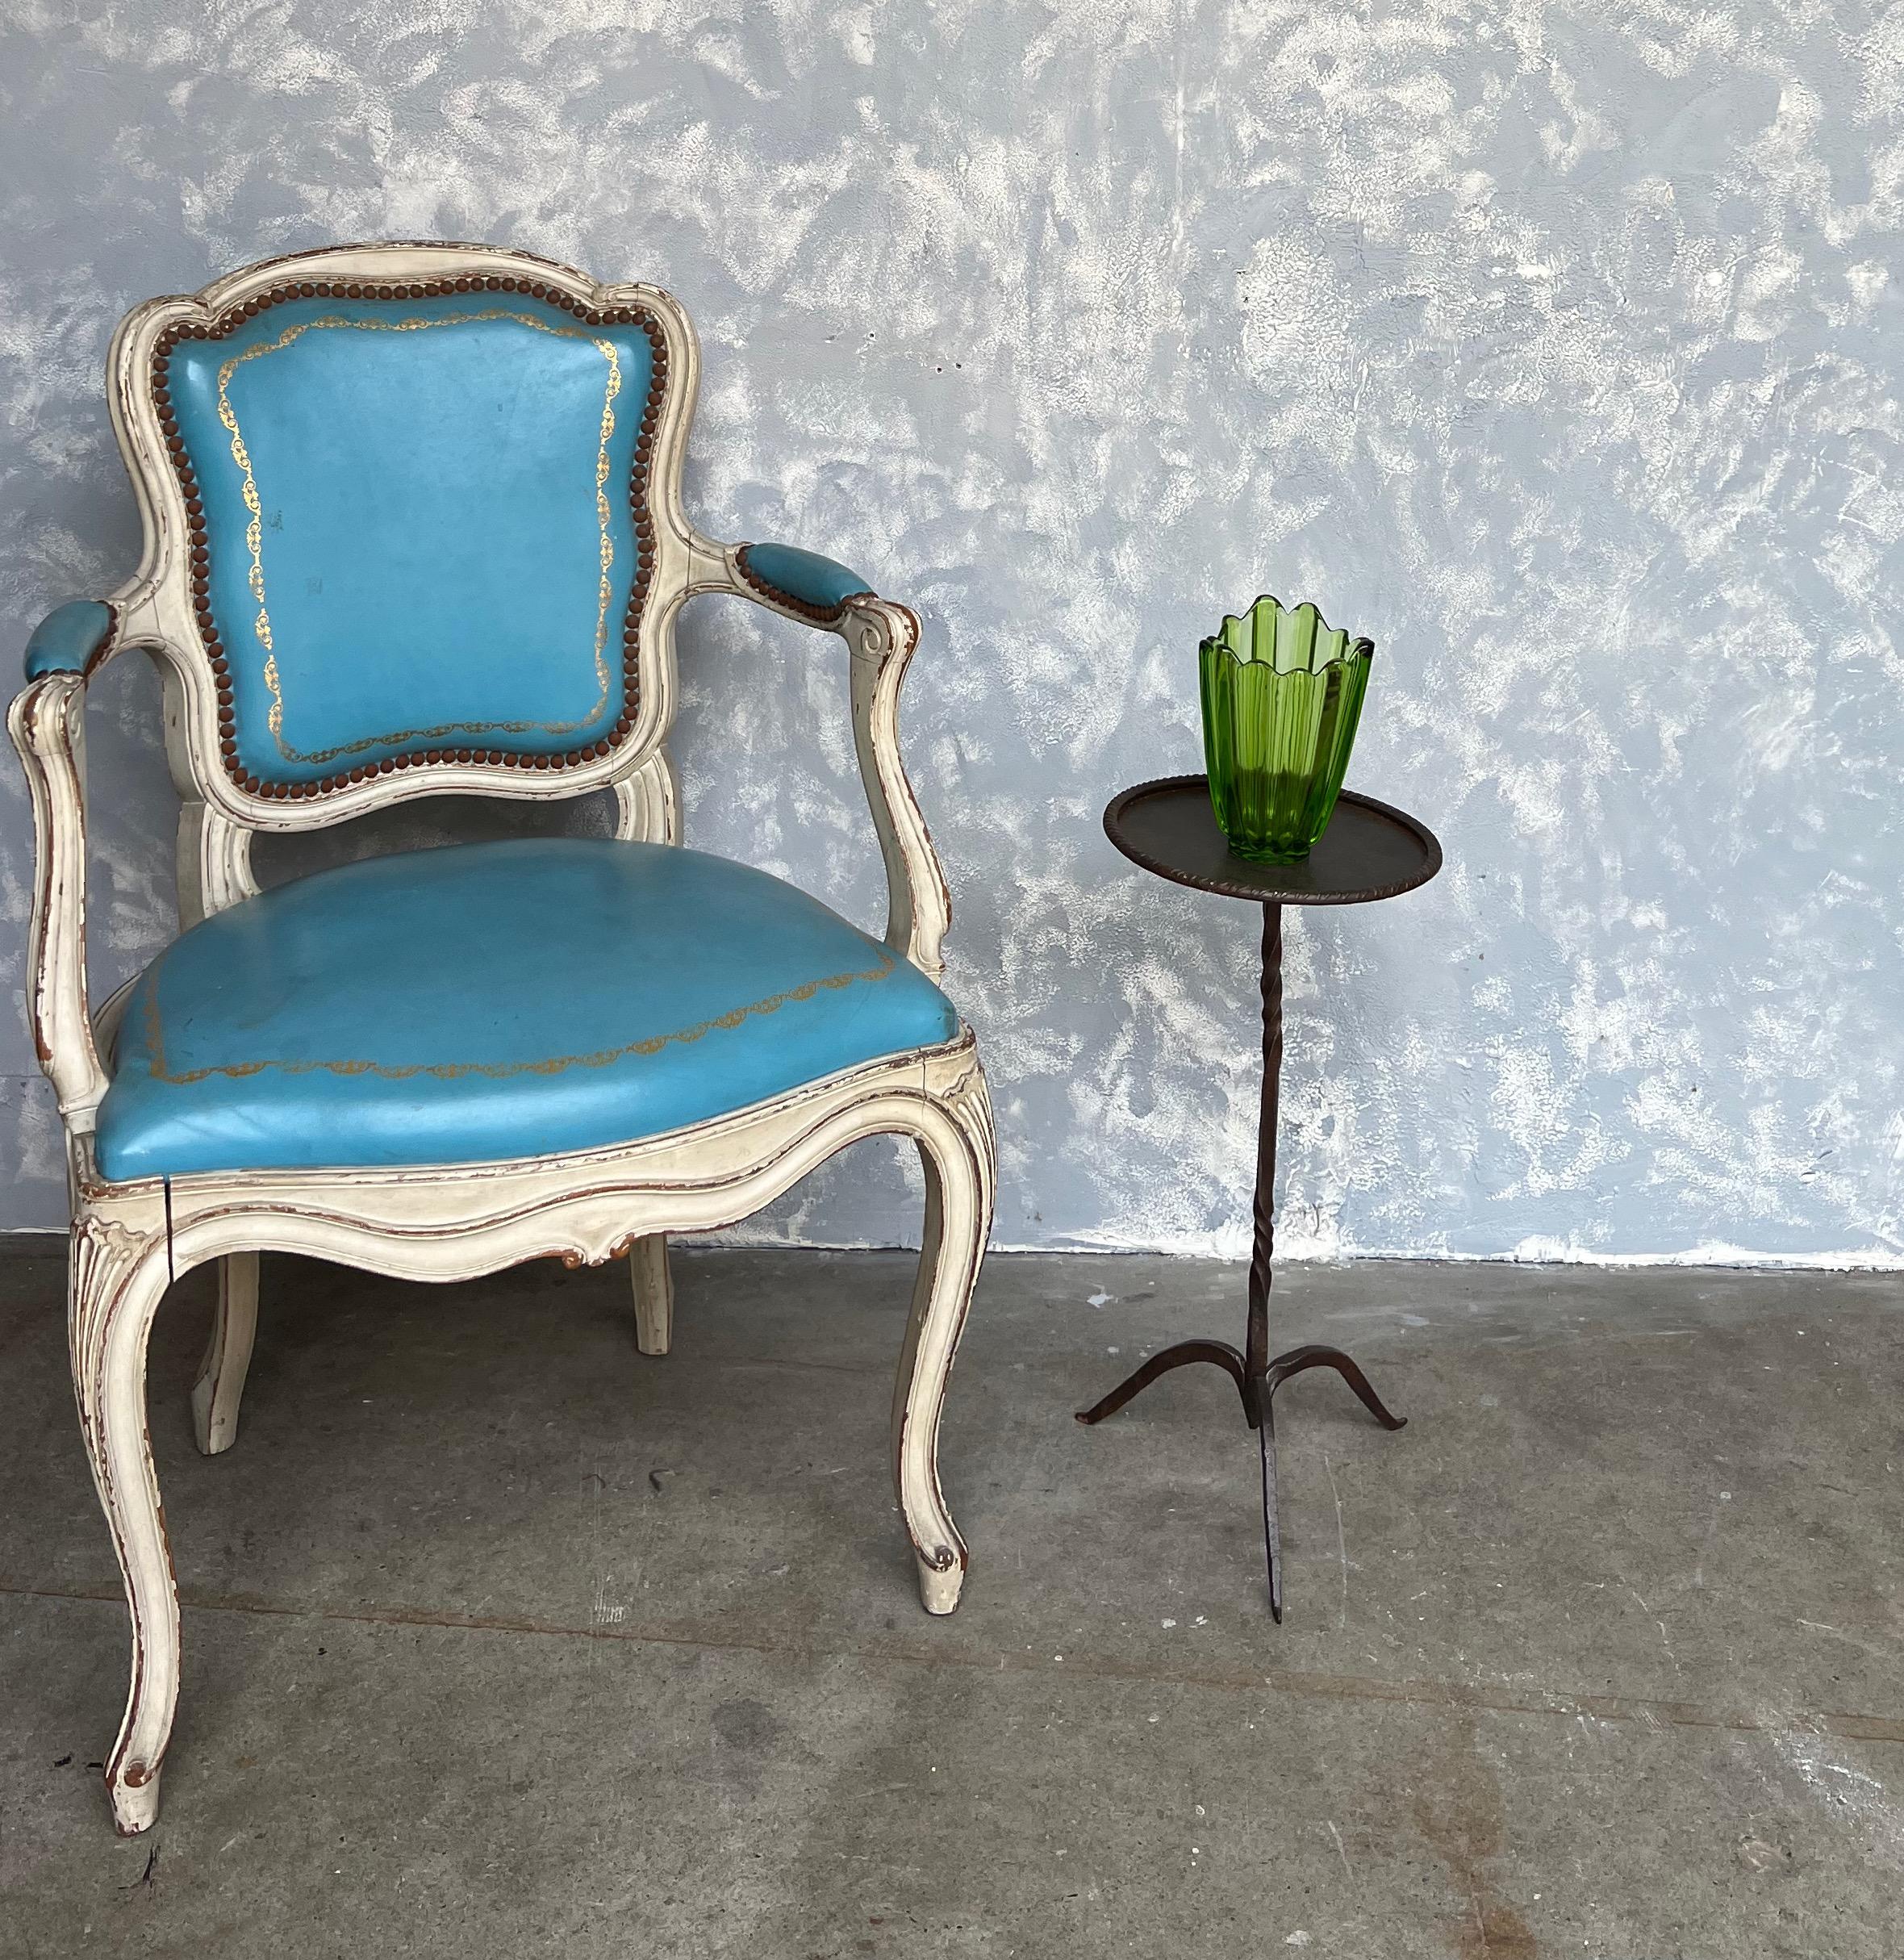 This unique small side table from 1950s Spain stands out with its round top enclosed in a rolled rim, mounted on an ornamental twisted stem. The table, made of patinated iron, rests on a delicate tripod base with tapered and pointed feet, adding to